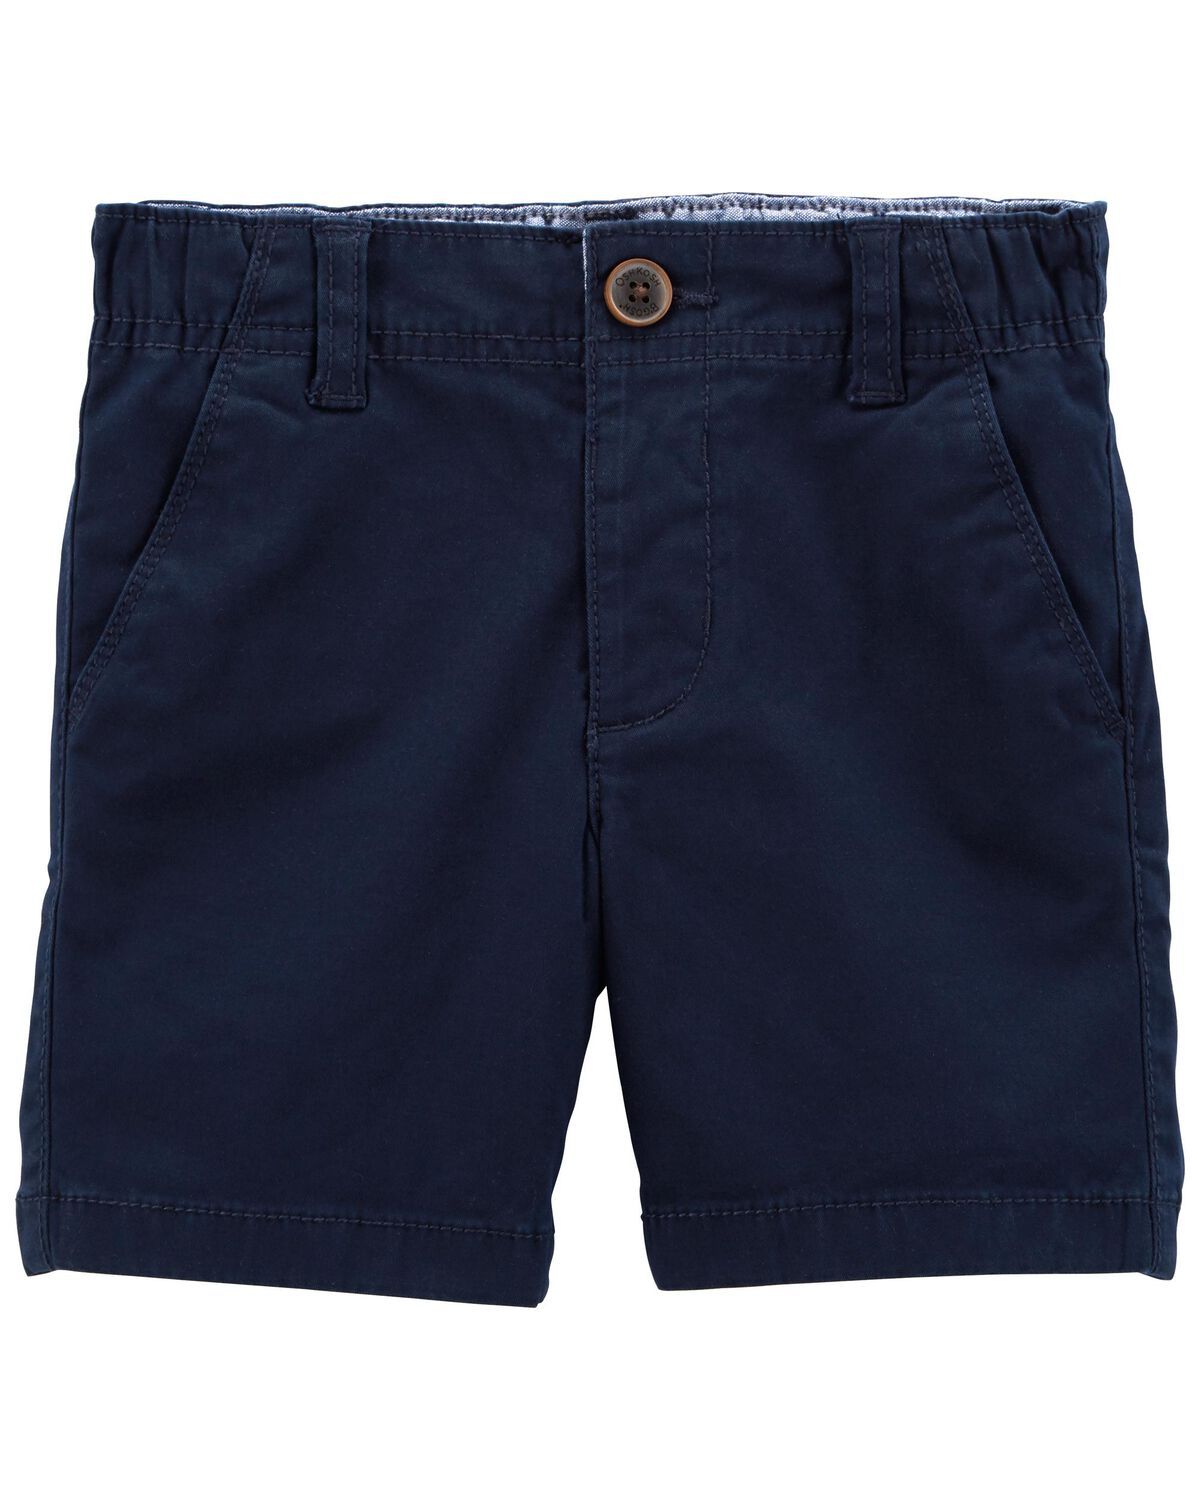 Navy Toddler Stretch Chino Shorts | carters.com | Carter's